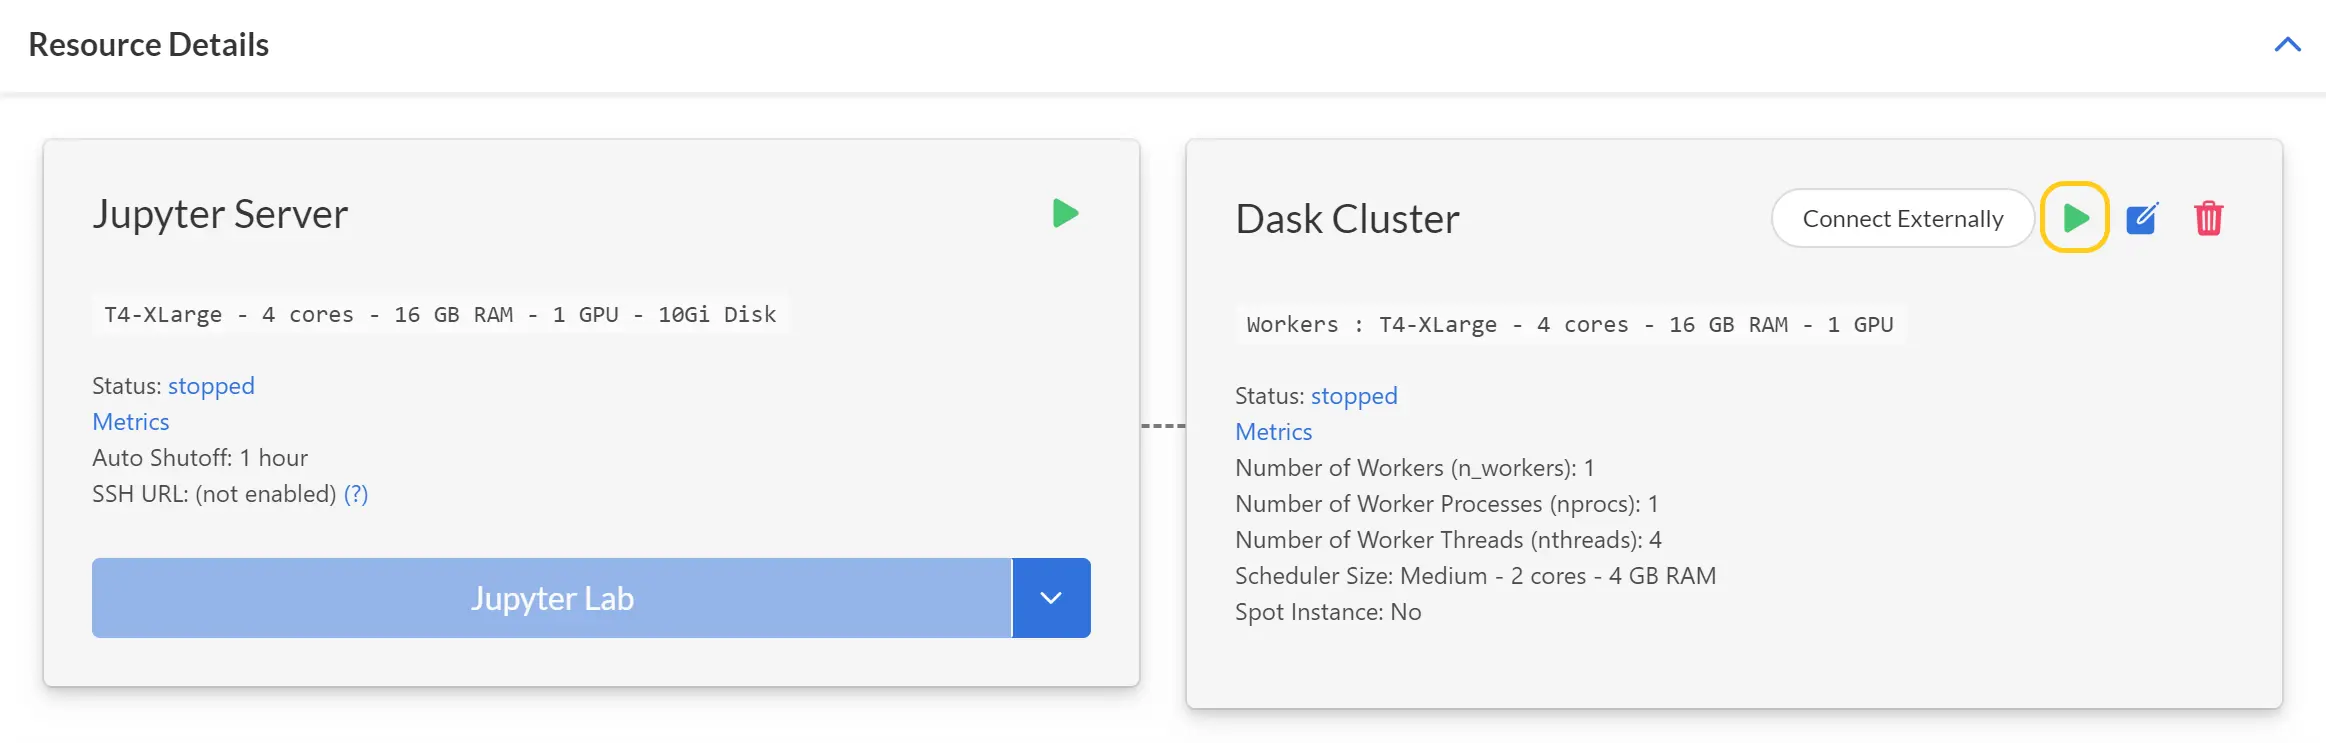 Cluster card in Project page of Saturn Cloud UI